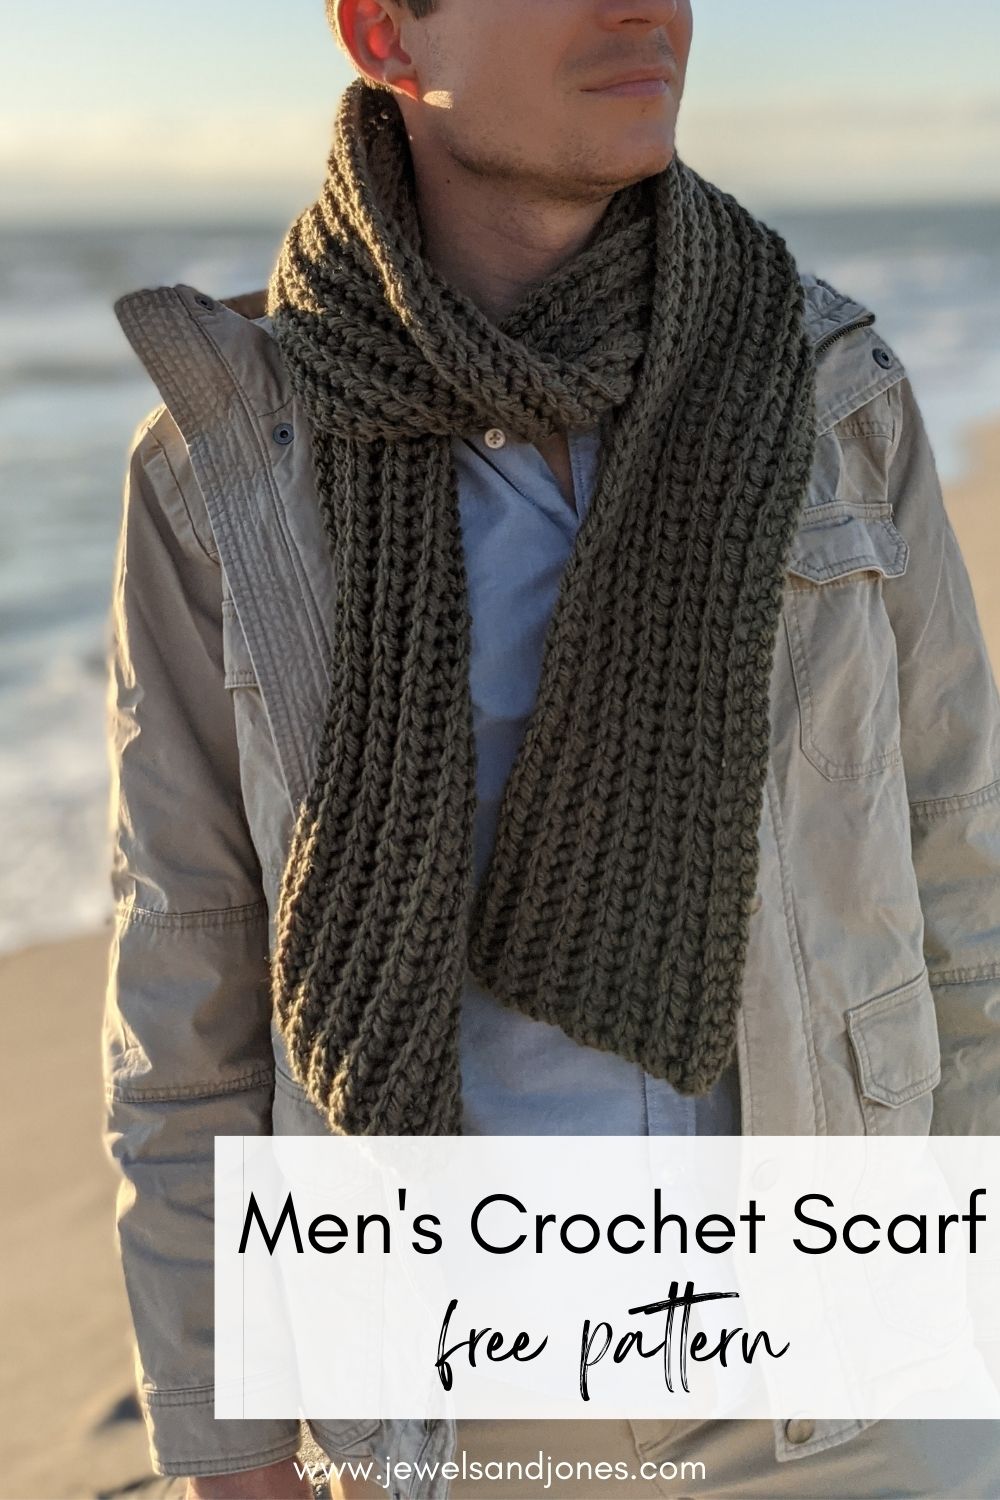 model is wearing a classic ribbed crochet scarf on the beach